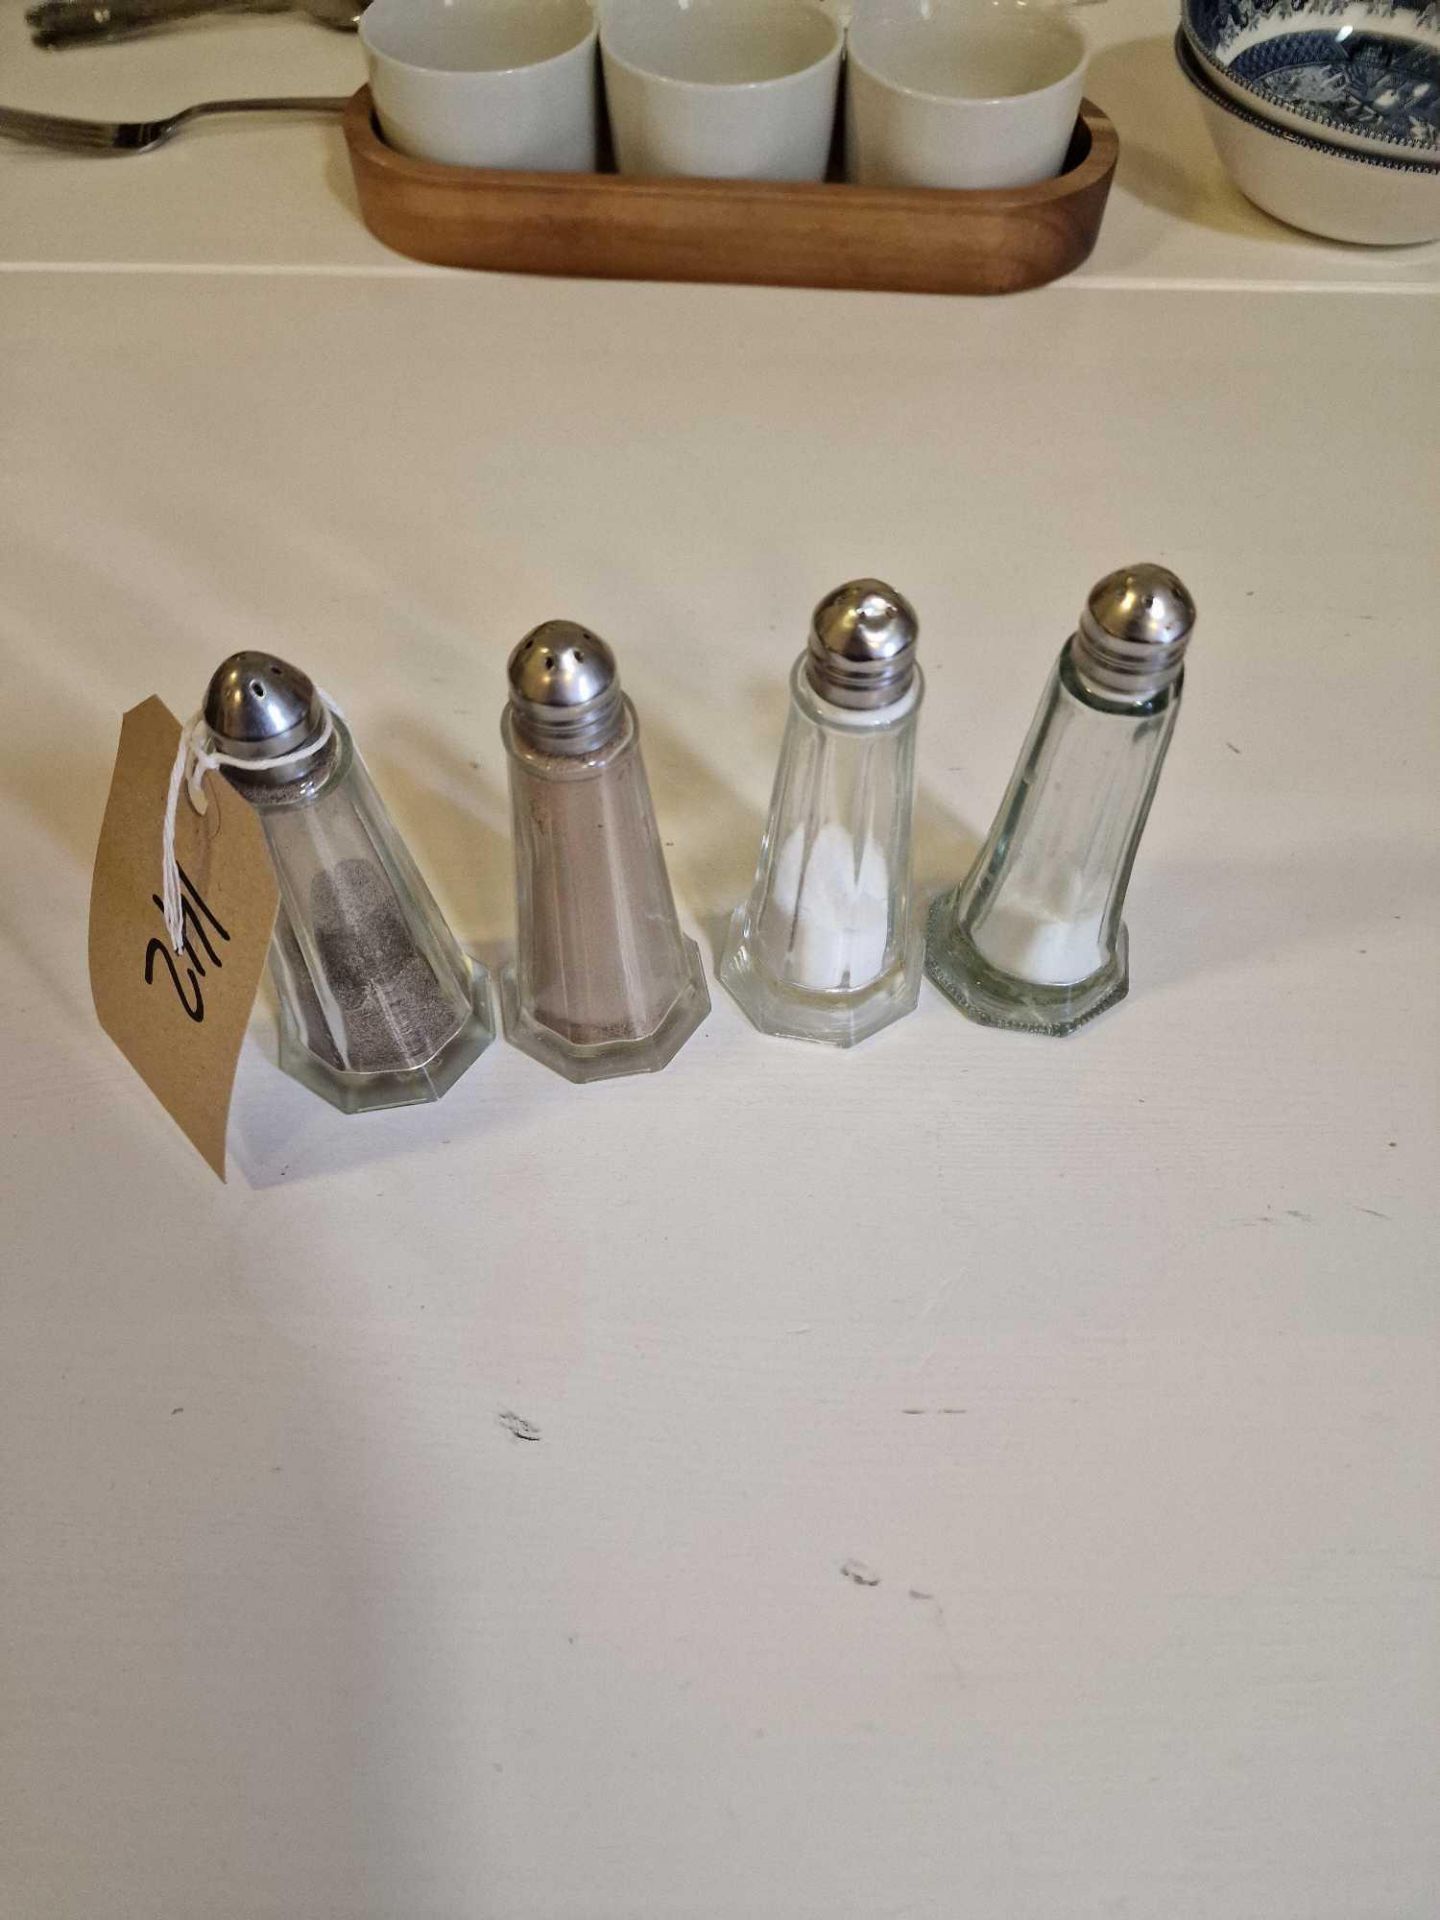 15 X Eiffel Tower Salt And Pepper Shakers